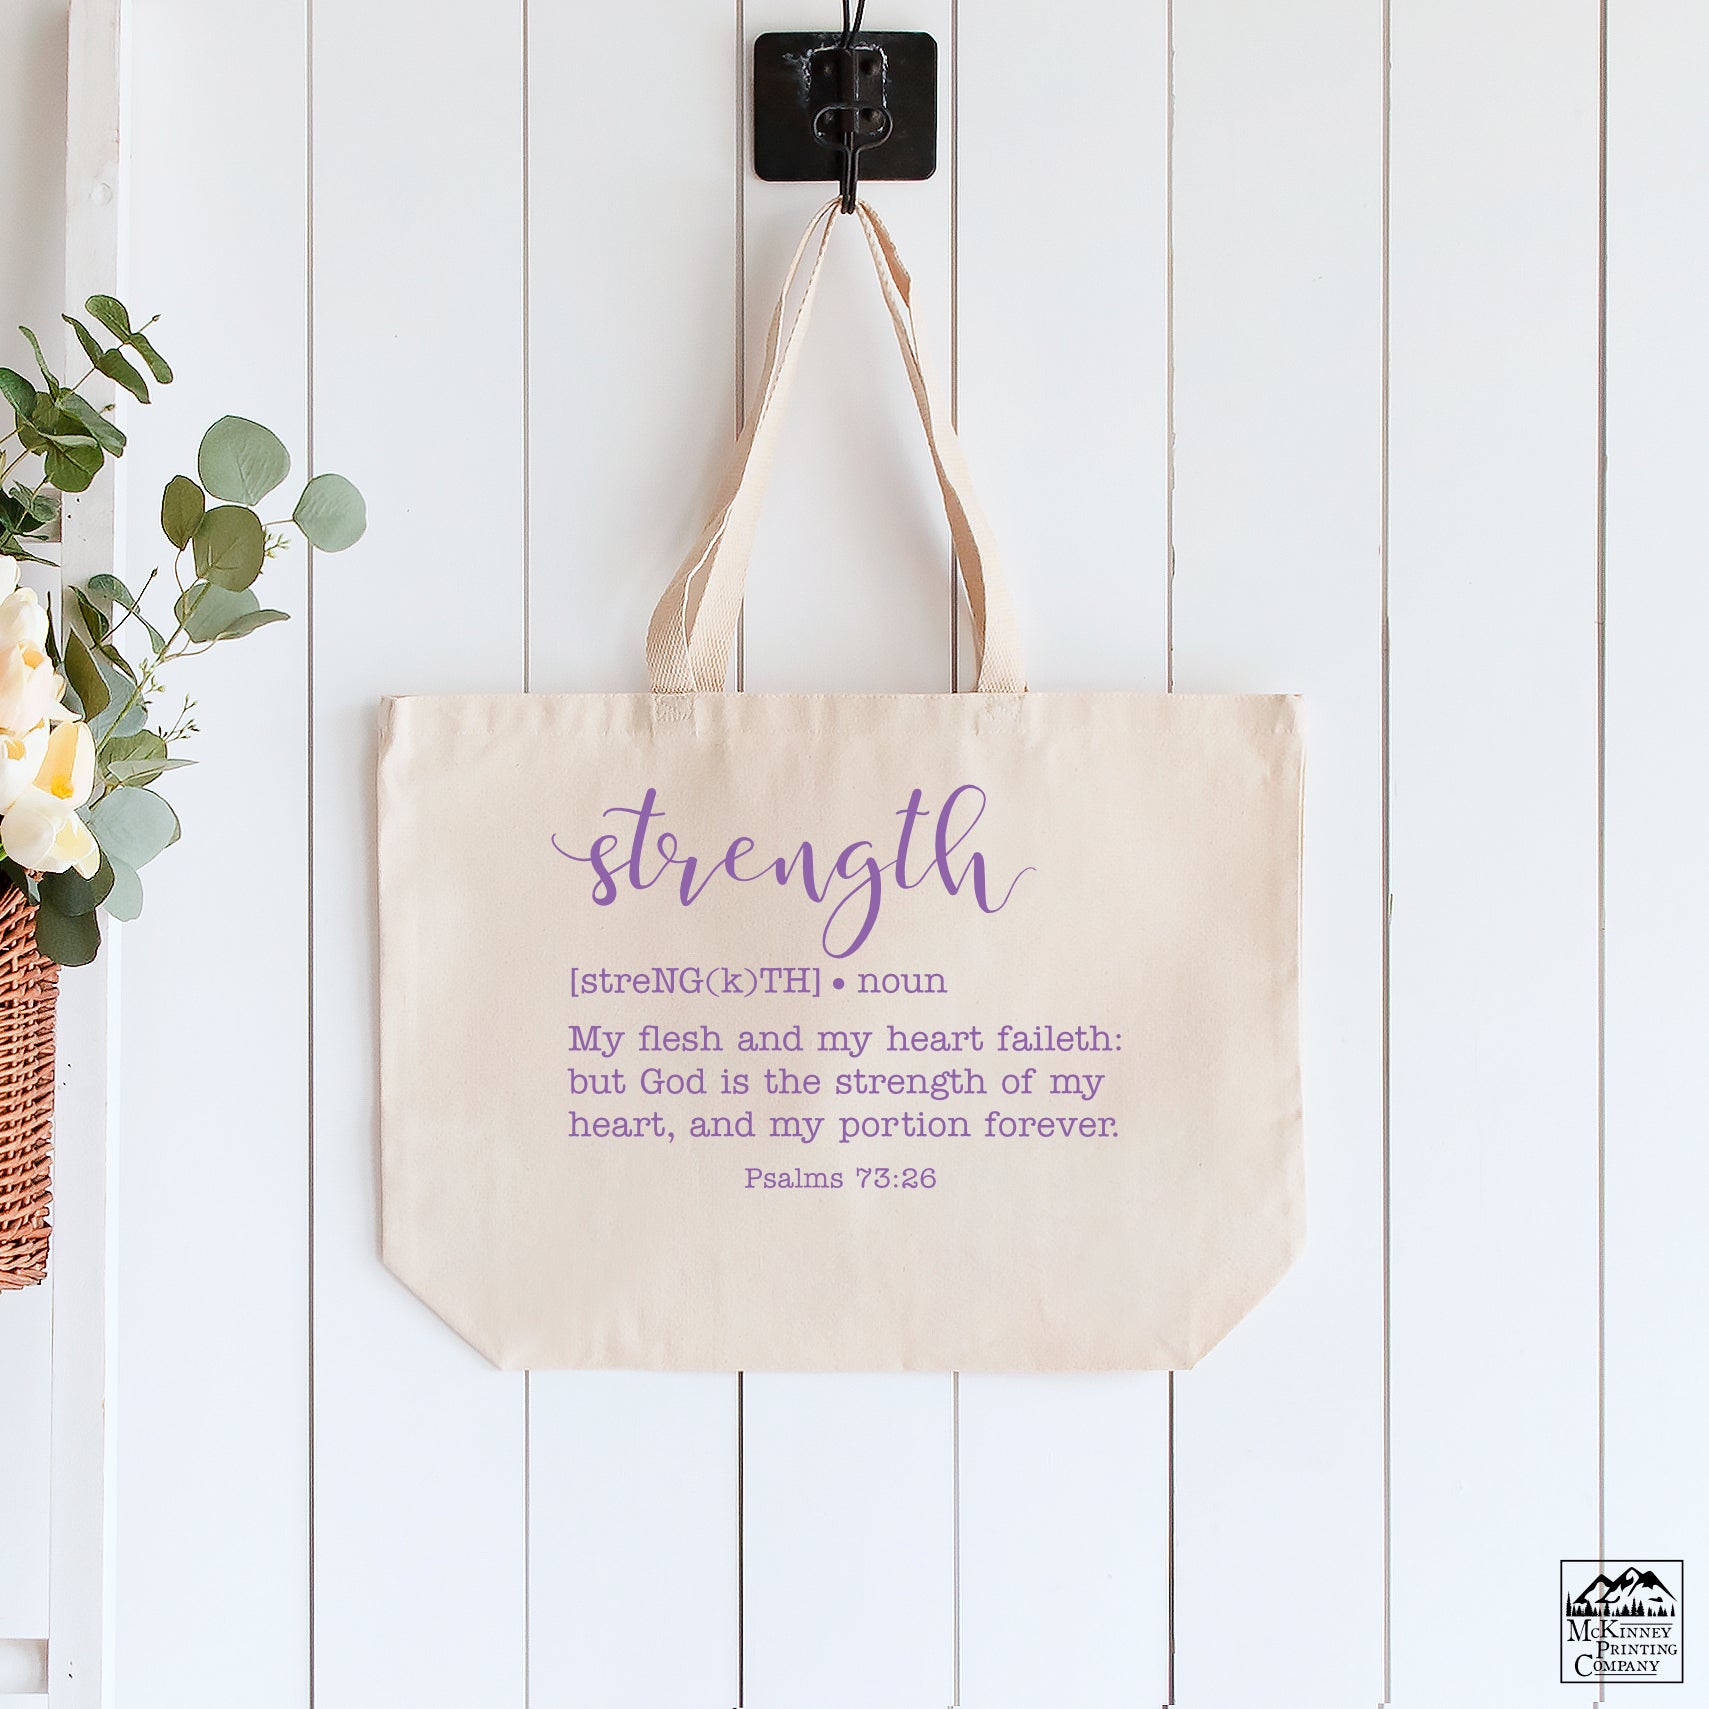 Christian Tote Bag, Bible Verse Psalms, Strength - My flesh and my heart faileth: but God is the strength of my heart, and my portion forever, Psalms 73:26